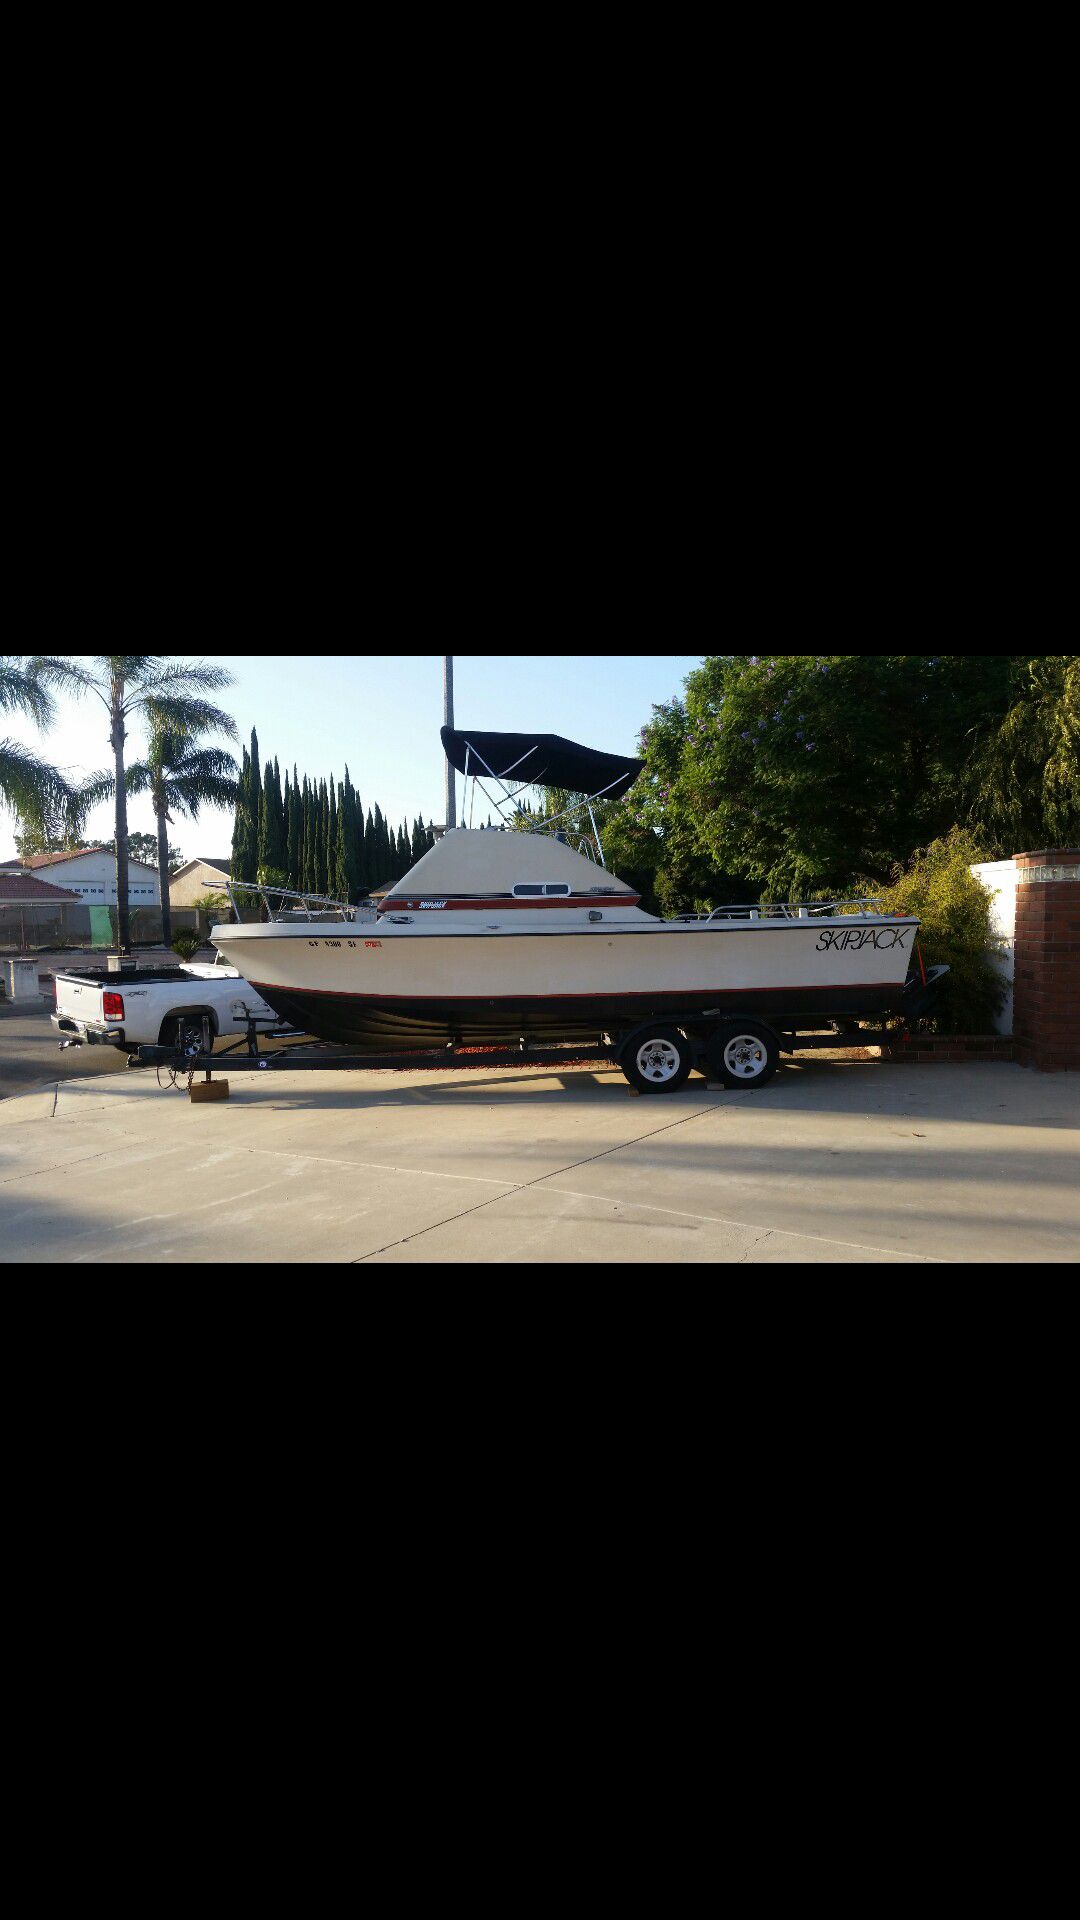 Great boat 24' for the price I am only asking